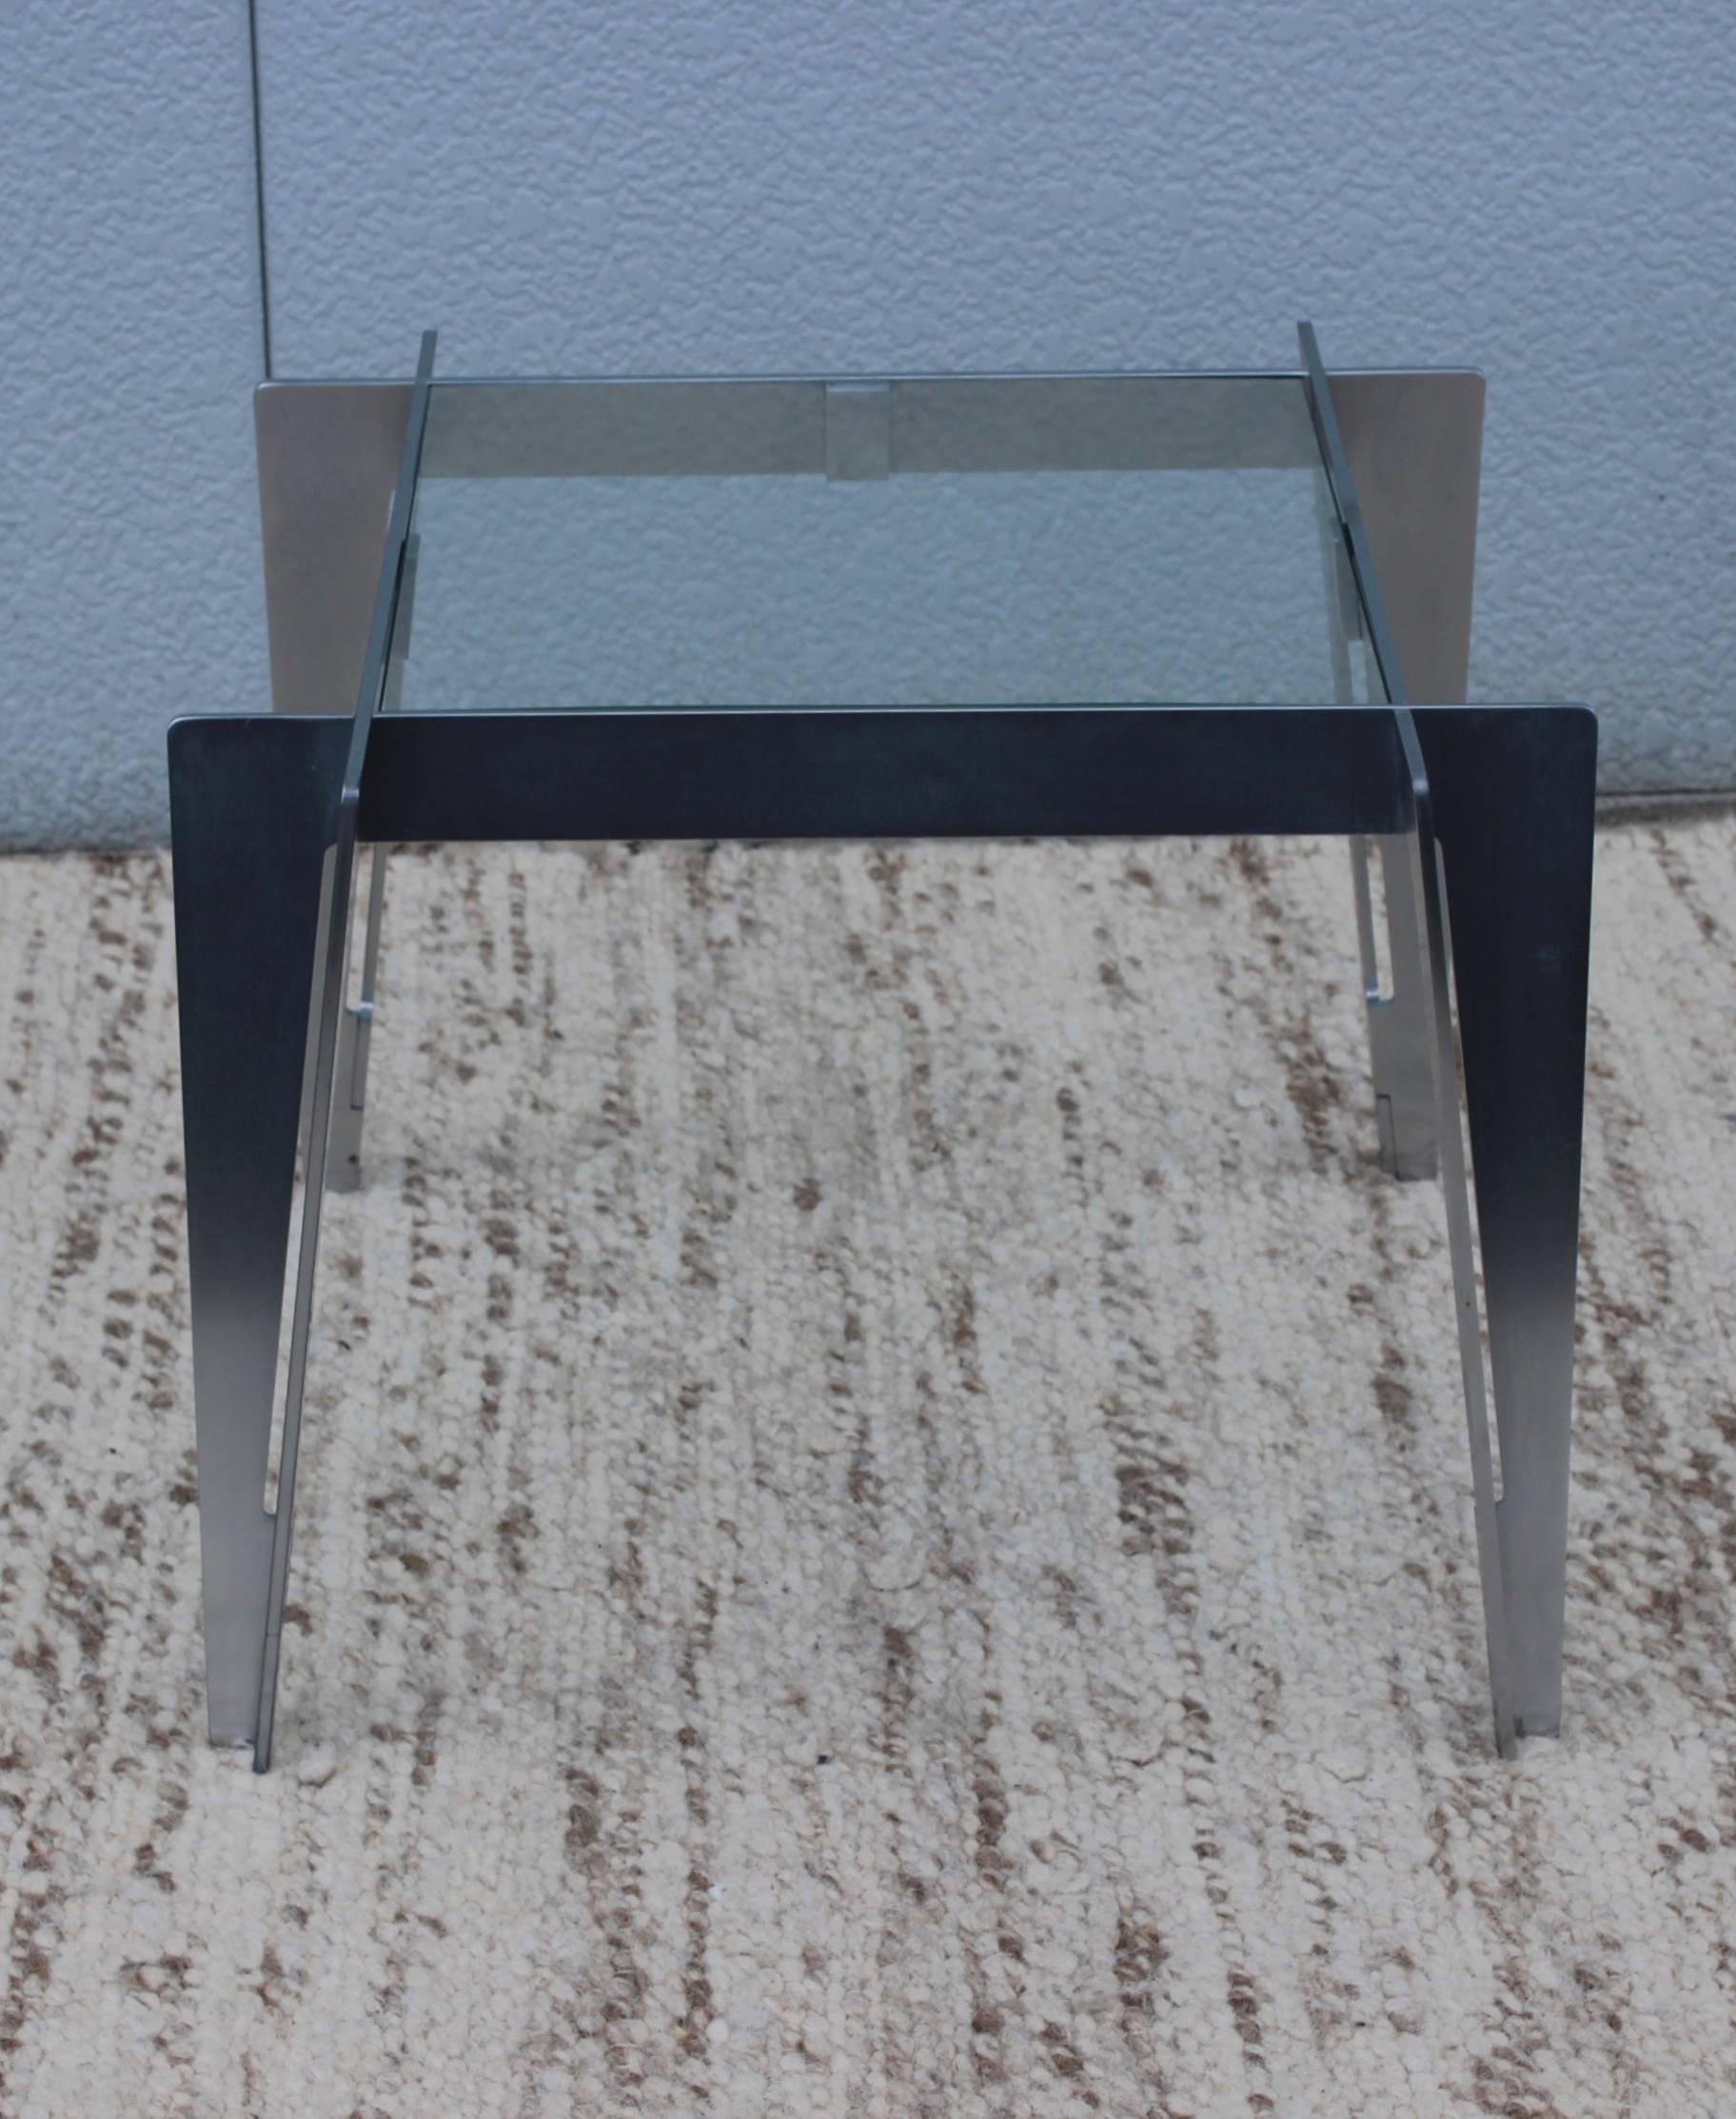 1970s brushed steel interlocking side table with glass top.